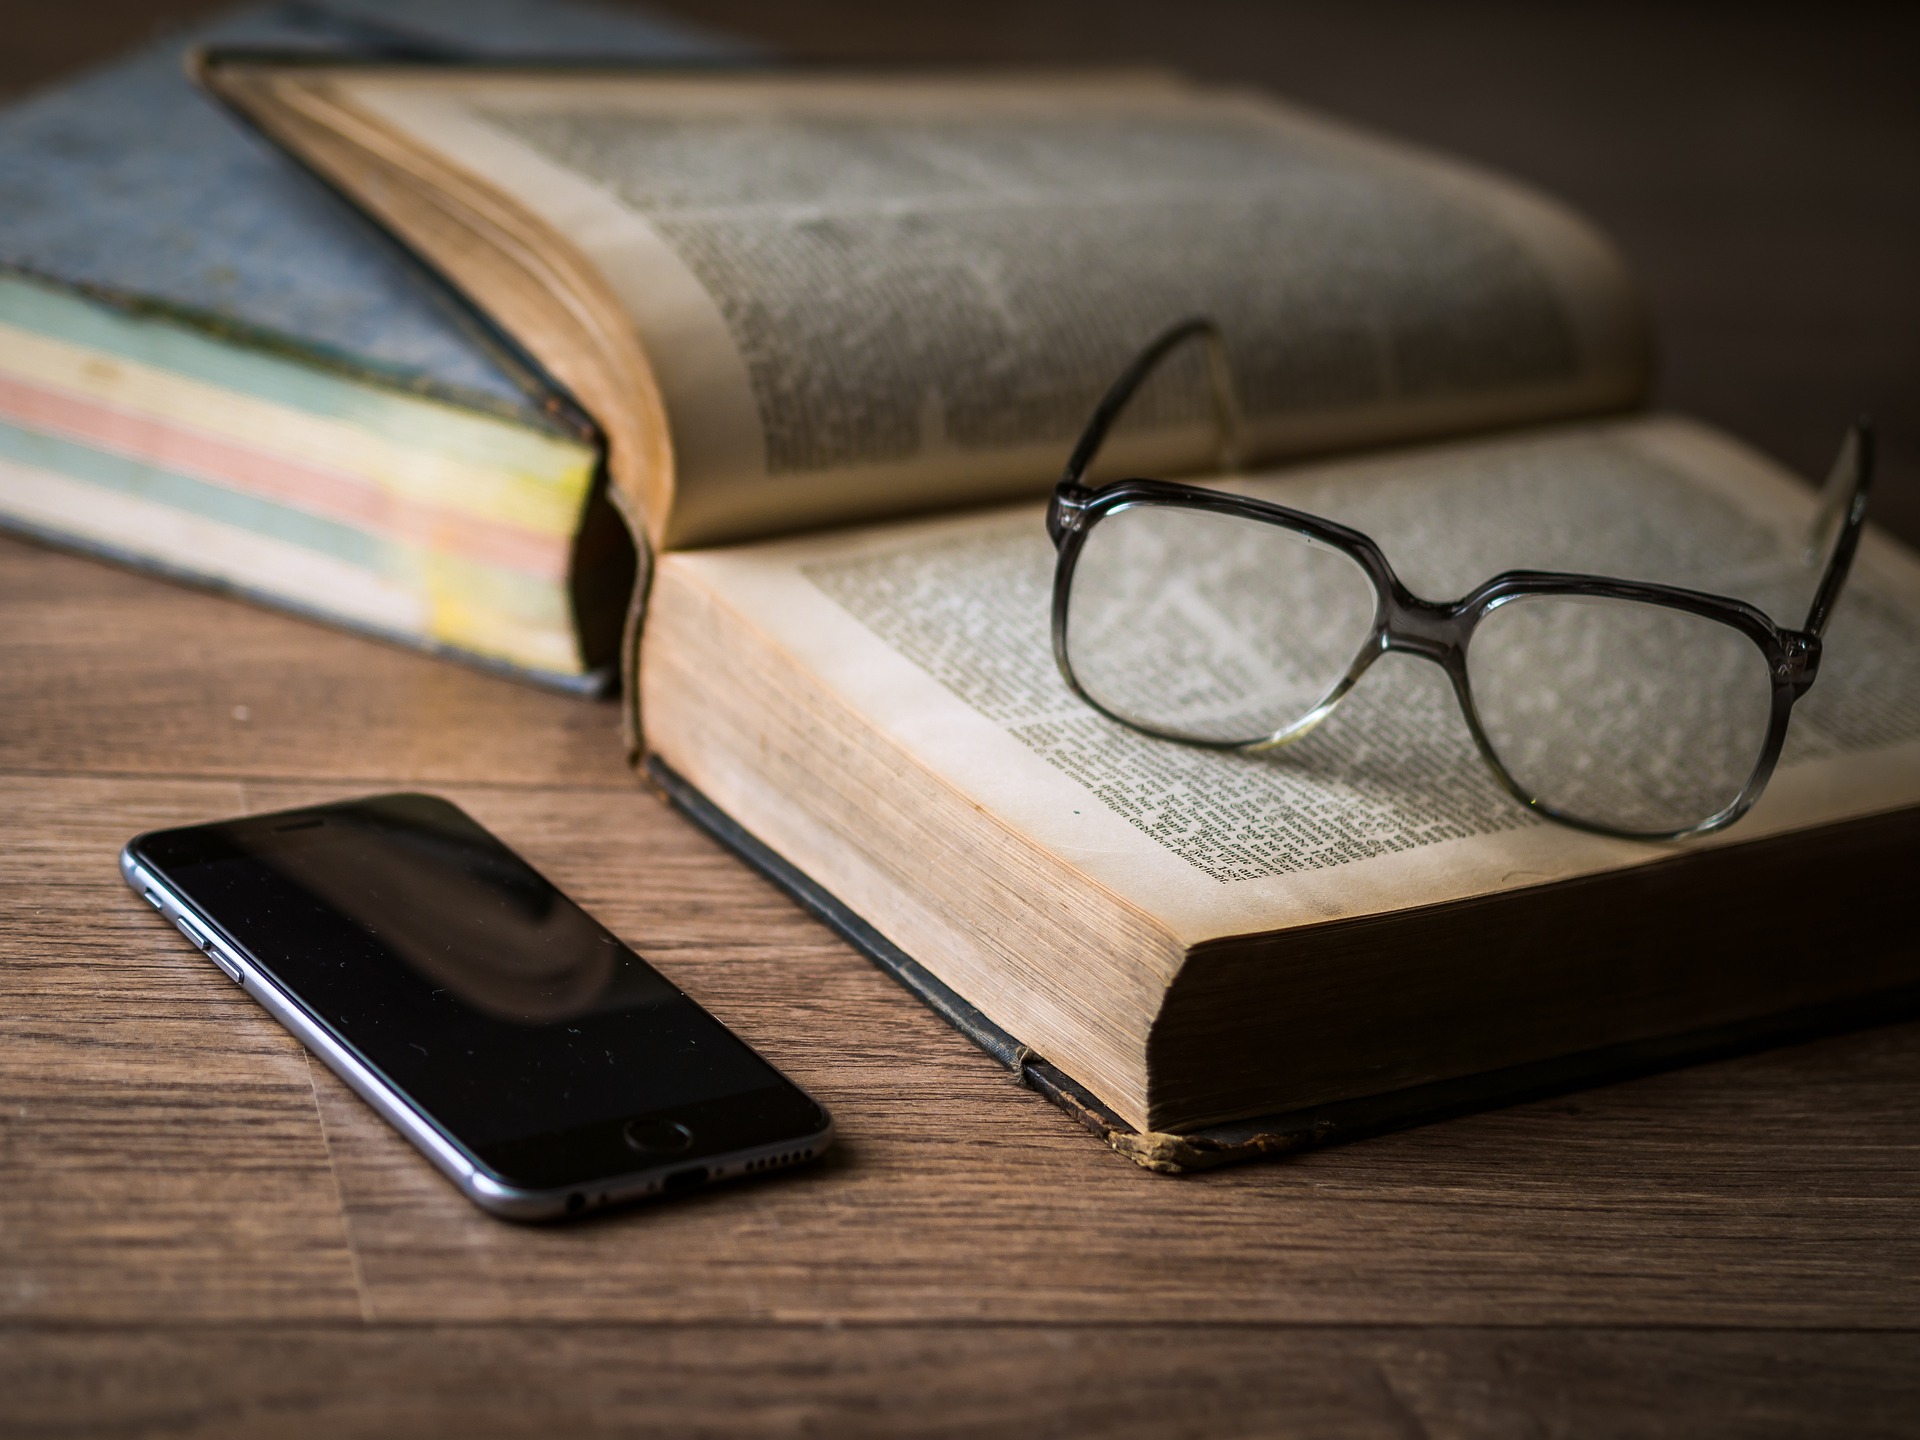 Open book, glasses, and cell phone